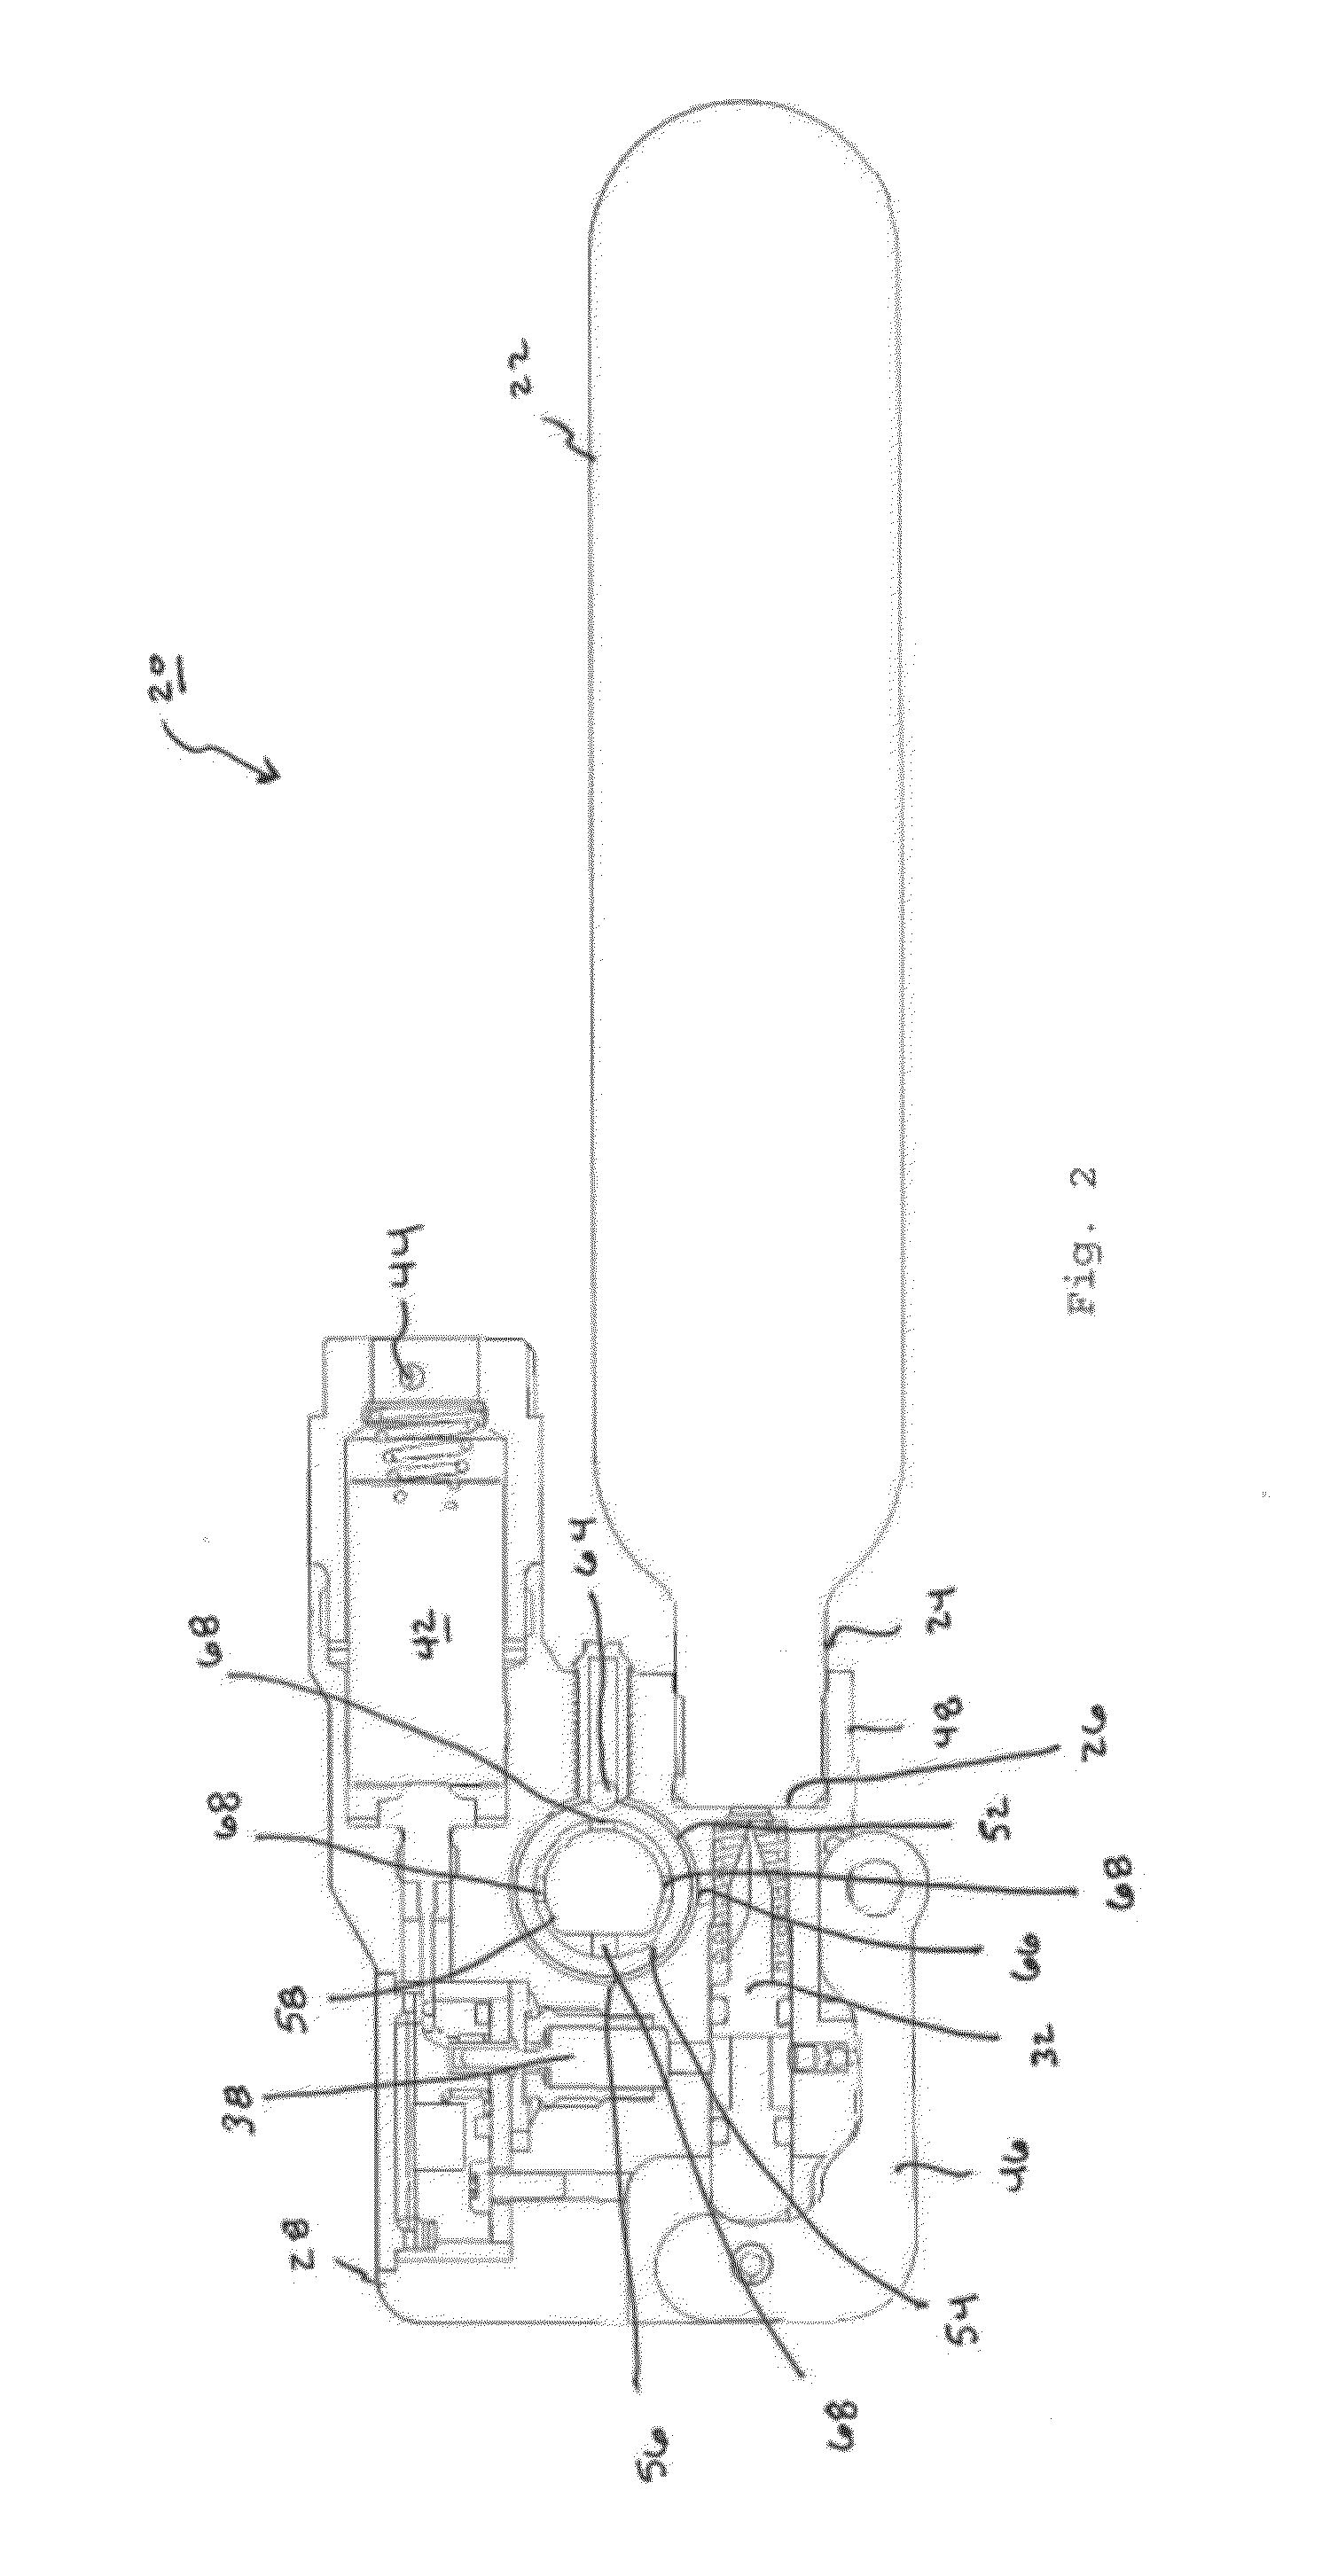 Water Actuated Pressurized Gas Release Device